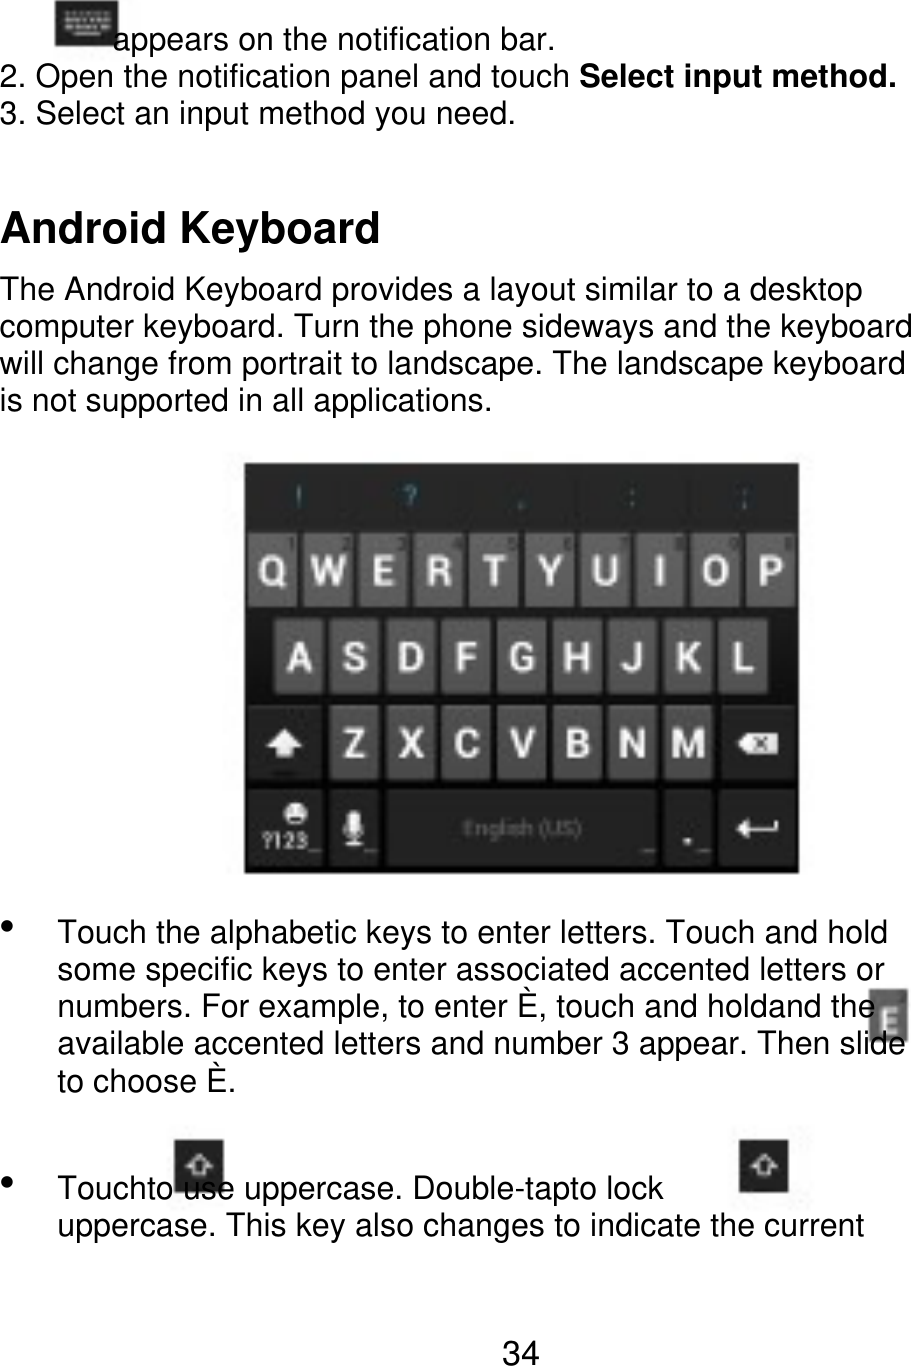        appears on the notification bar. 2. Open the notification panel and touch Select input method. 3. Select an input method you need. Android Keyboard The Android Keyboard provides a layout similar to a desktop computer keyboard. Turn the phone sideways and the keyboard will change from portrait to landscape. The landscape keyboard is not supported in all applications.  Touch the alphabetic keys to enter letters. Touch and hold some specific keys to enter associated accented letters or numbers. For example, to enter È, touch and holdand the available accented letters and number 3 appear. Then slide to choose È. Touchto use uppercase. Double-tapto lock uppercase. This key also changes to indicate the current  34 